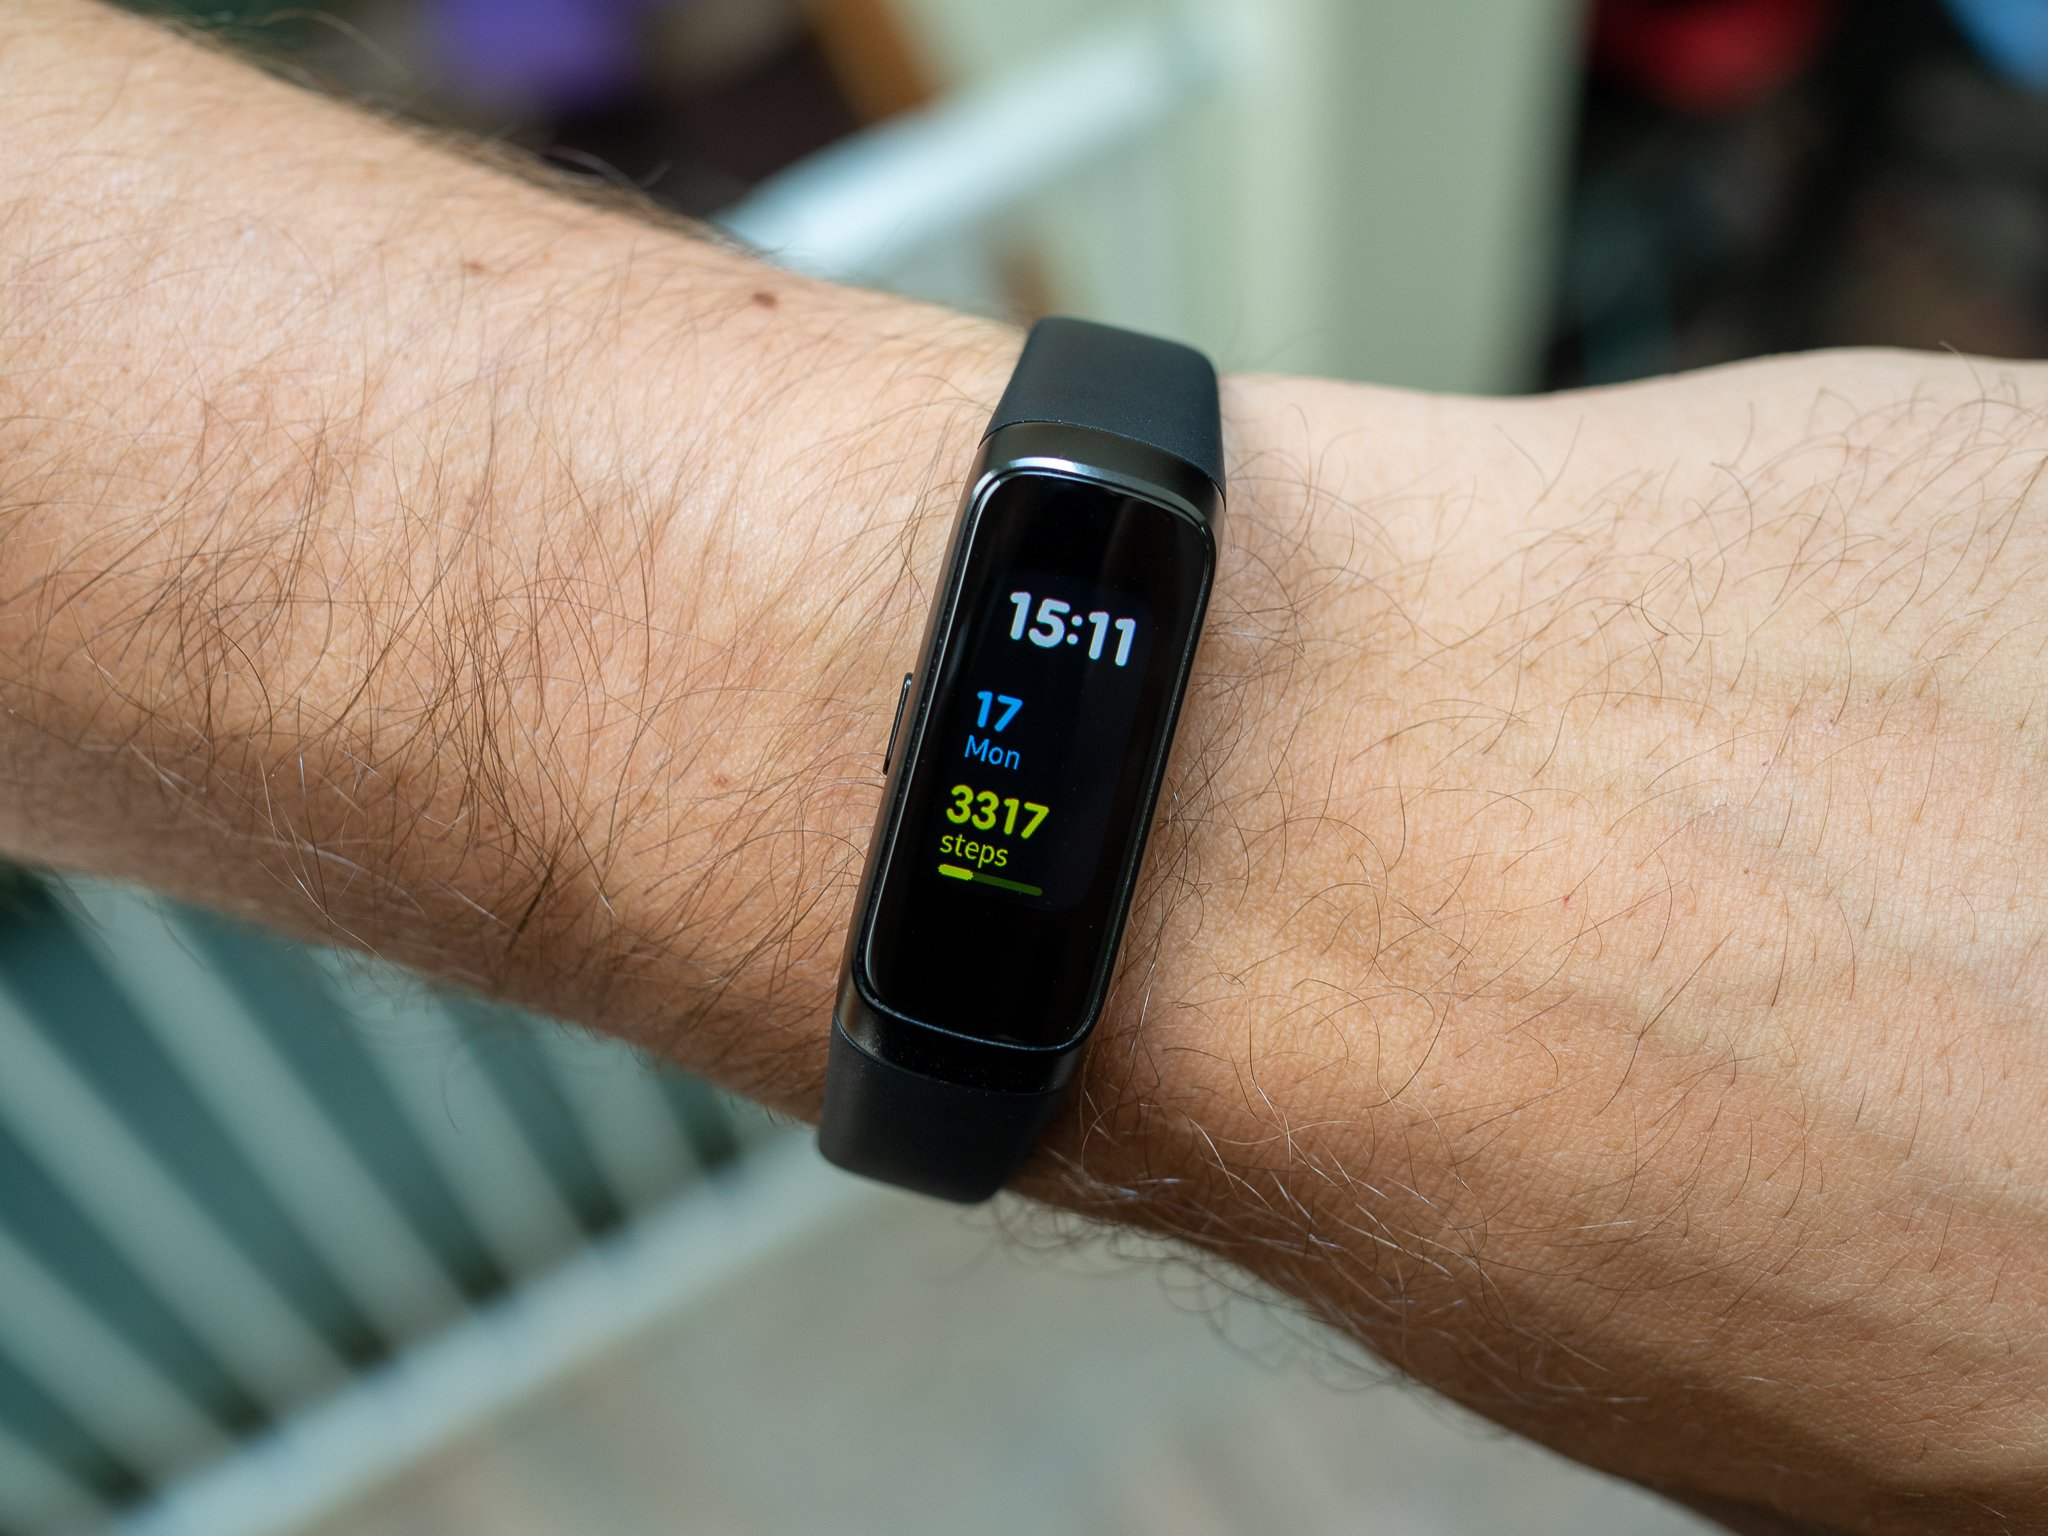 samsung watch vs fitbit charge 3